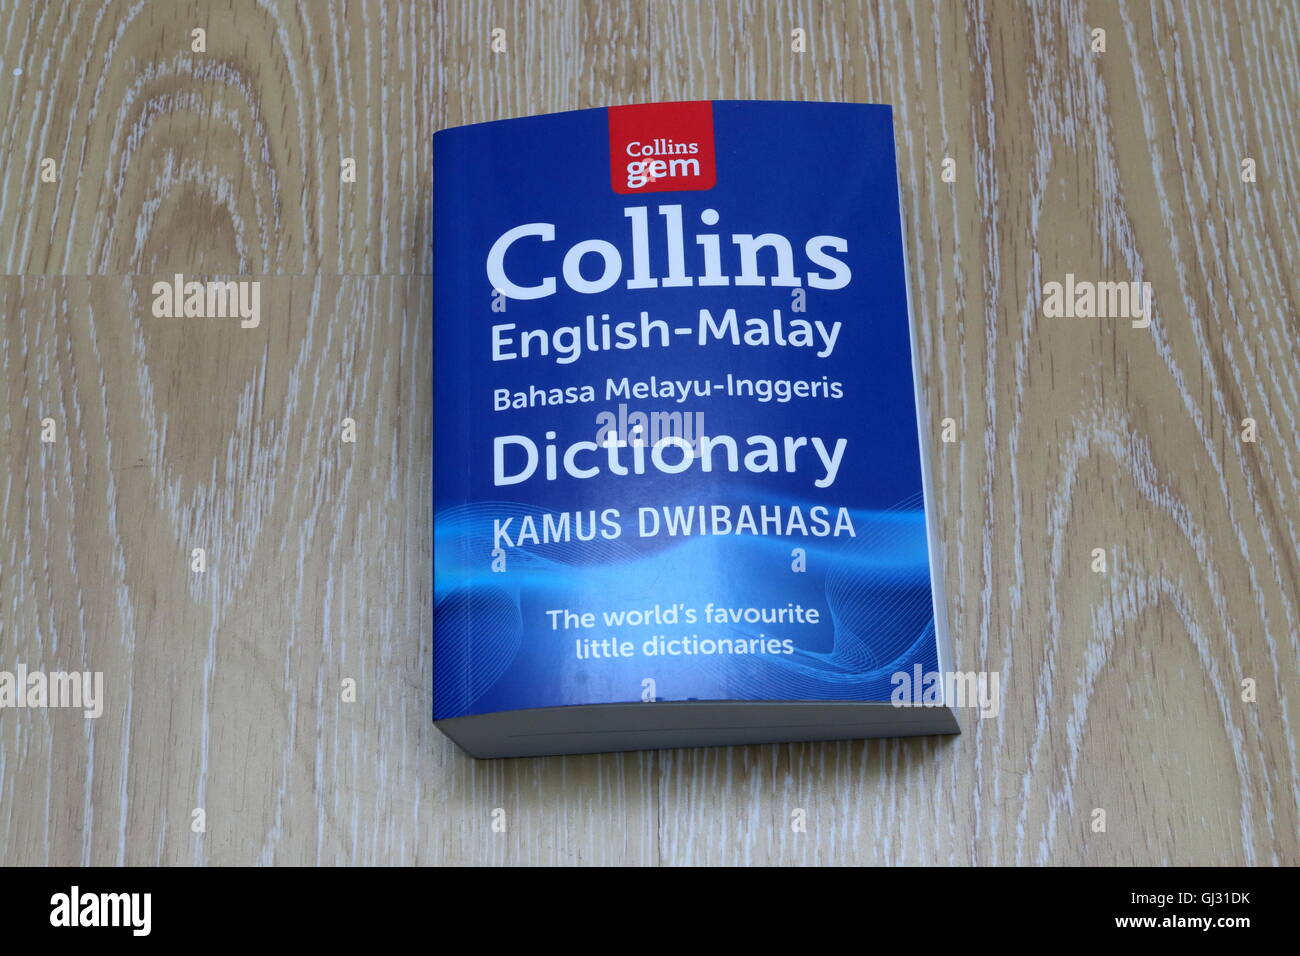 Collins English - Malay dictionary on wooden background Stock Photo